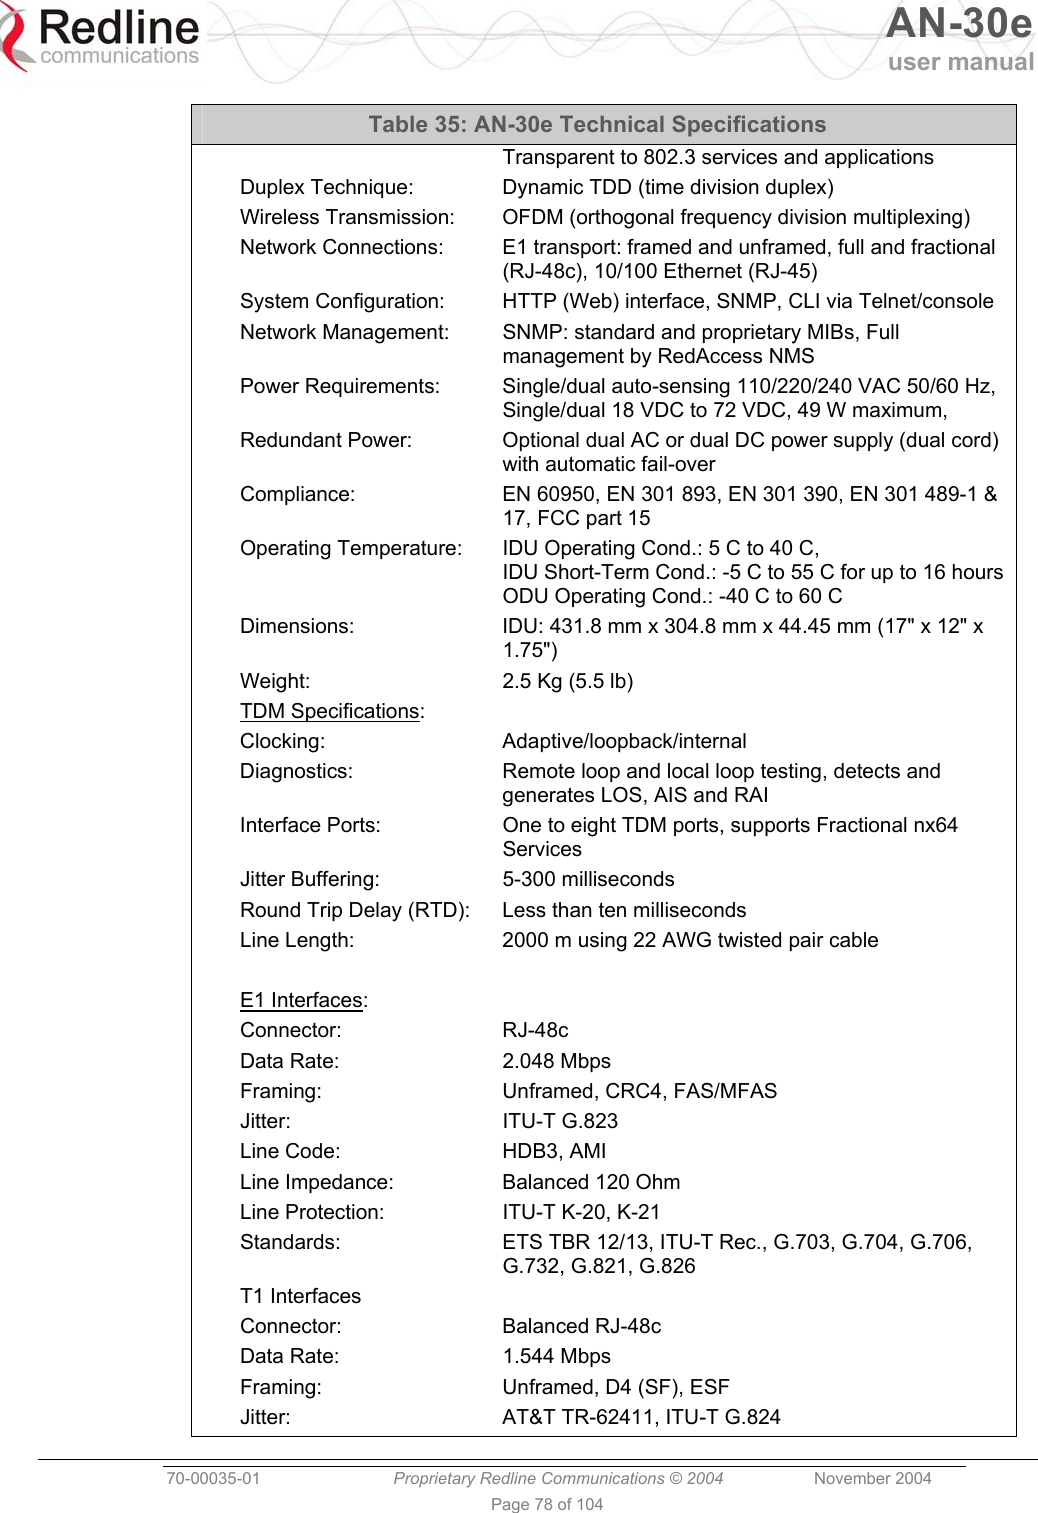   AN-30e user manual  70-00035-01  Proprietary Redline Communications © 2004 November 2004   Page 78 of 104 Table 35: AN-30e Technical Specifications Transparent to 802.3 services and applications Duplex Technique:  Dynamic TDD (time division duplex) Wireless Transmission:  OFDM (orthogonal frequency division multiplexing) Network Connections:  E1 transport: framed and unframed, full and fractional (RJ-48c), 10/100 Ethernet (RJ-45) System Configuration:  HTTP (Web) interface, SNMP, CLI via Telnet/console  Network Management:  SNMP: standard and proprietary MIBs, Full management by RedAccess NMS Power Requirements:  Single/dual auto-sensing 110/220/240 VAC 50/60 Hz, Single/dual 18 VDC to 72 VDC, 49 W maximum, Redundant Power:  Optional dual AC or dual DC power supply (dual cord) with automatic fail-over Compliance:  EN 60950, EN 301 893, EN 301 390, EN 301 489-1 &amp; 17, FCC part 15 Operating Temperature:  IDU Operating Cond.: 5 C to 40 C, IDU Short-Term Cond.: -5 C to 55 C for up to 16 hoursODU Operating Cond.: -40 C to 60 C Dimensions:  IDU: 431.8 mm x 304.8 mm x 44.45 mm (17&quot; x 12&quot; x 1.75&quot;) Weight:  2.5 Kg (5.5 lb) TDM Specifications:  Clocking: Adaptive/loopback/internal Diagnostics:  Remote loop and local loop testing, detects and generates LOS, AIS and RAI Interface Ports:  One to eight TDM ports, supports Fractional nx64 Services Jitter Buffering:  5-300 milliseconds Round Trip Delay (RTD):  Less than ten milliseconds Line Length:  2000 m using 22 AWG twisted pair cable  E1 Interfaces:  Connector: RJ-48c Data Rate:  2.048 Mbps Framing:  Unframed, CRC4, FAS/MFAS Jitter: ITU-T G.823 Line Code:  HDB3, AMI Line Impedance:  Balanced 120 Ohm Line Protection:  ITU-T K-20, K-21 Standards:  ETS TBR 12/13, ITU-T Rec., G.703, G.704, G.706, G.732, G.821, G.826 T1 Interfaces Connector: Balanced RJ-48c Data Rate:  1.544 Mbps Framing:  Unframed, D4 (SF), ESF Jitter:  AT&amp;T TR-62411, ITU-T G.824 